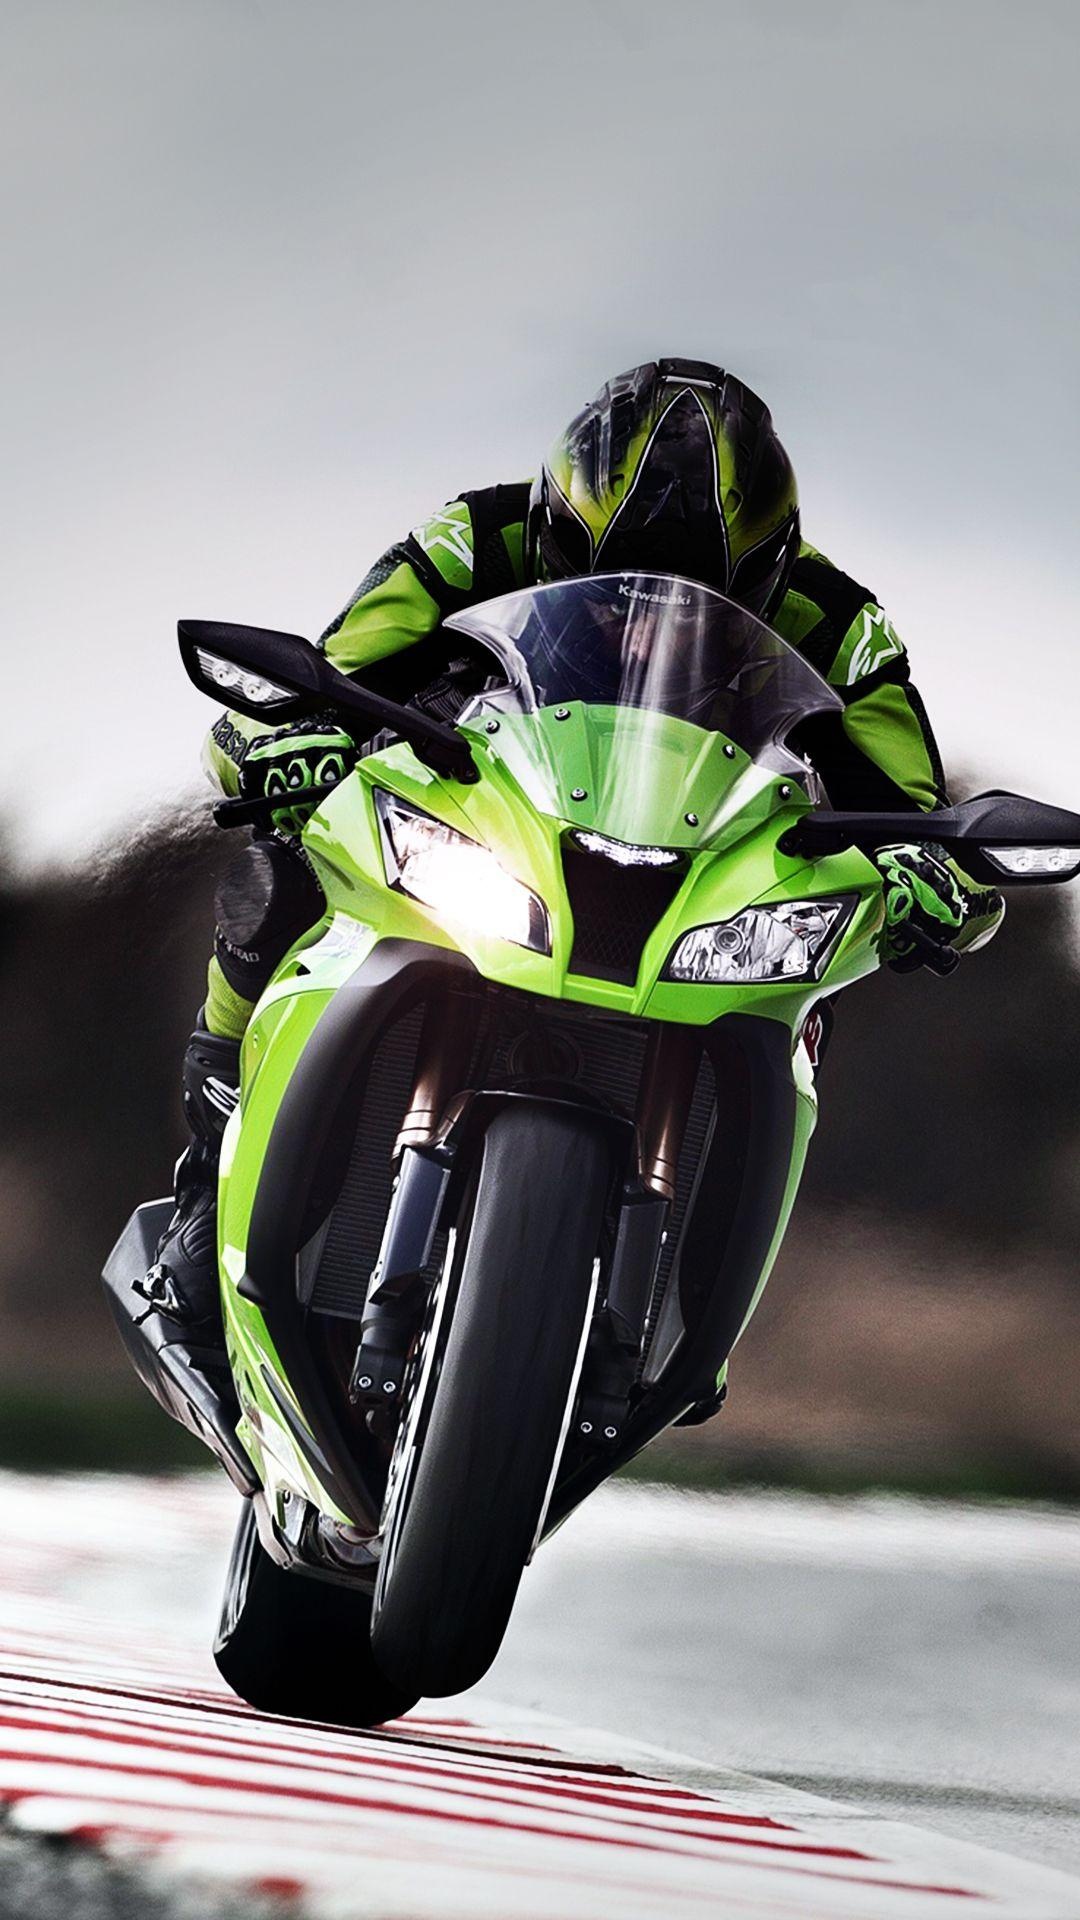 Motorcycle Racing: The colors of the outfit and the bike match and complement each other perfectly, Sports gear. 1080x1920 Full HD Wallpaper.